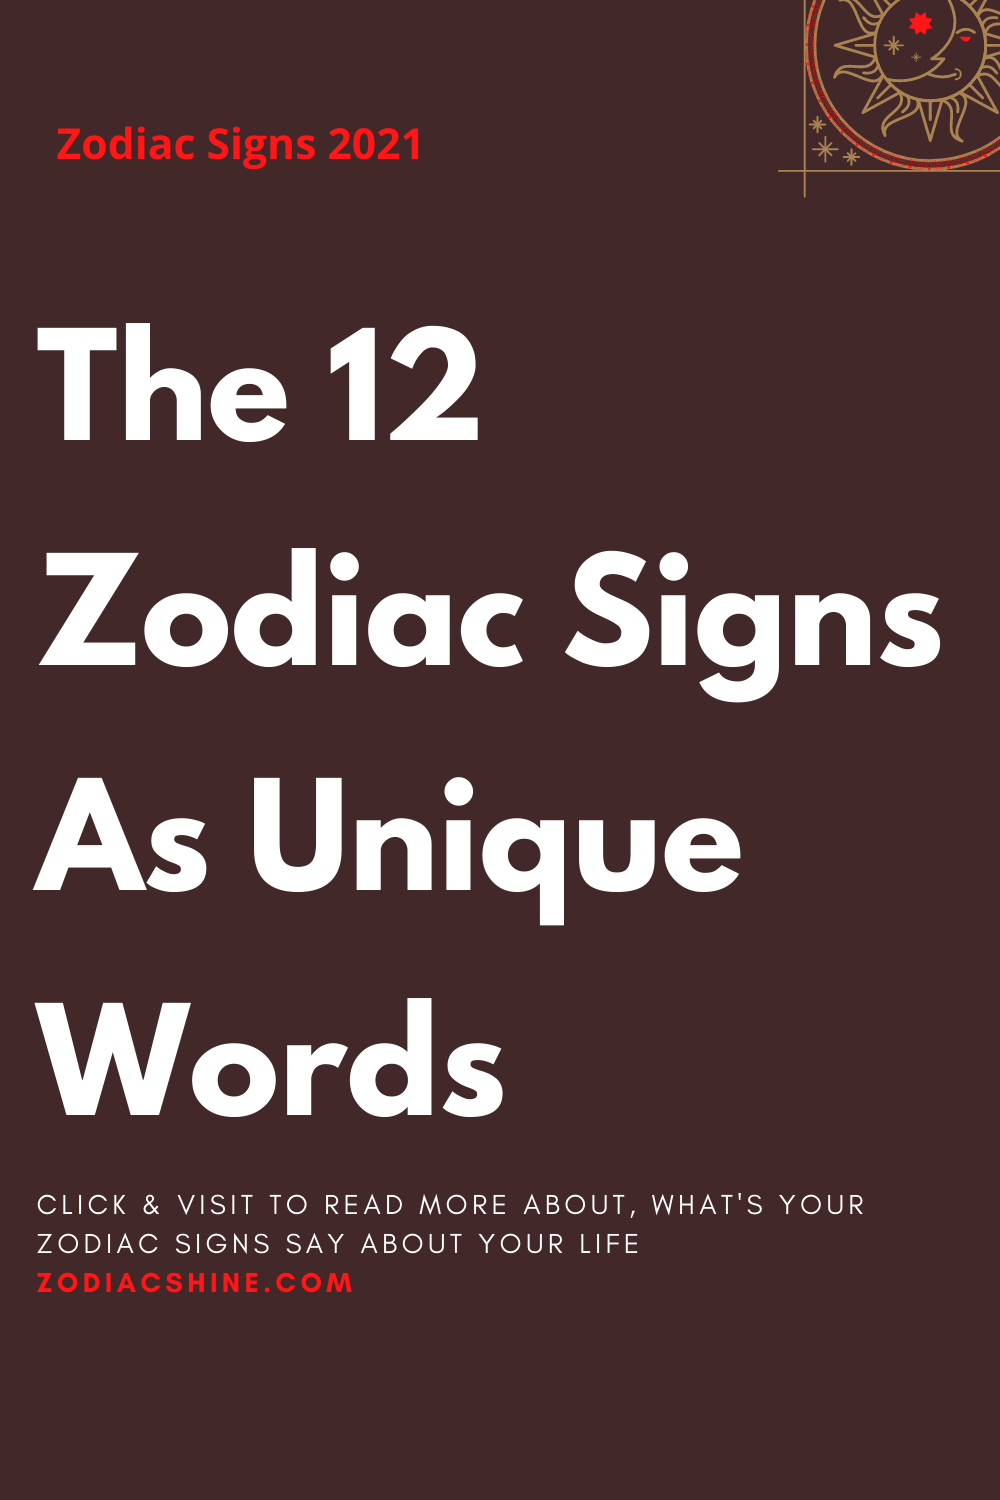 The 12 Zodiac Signs As Unique Words